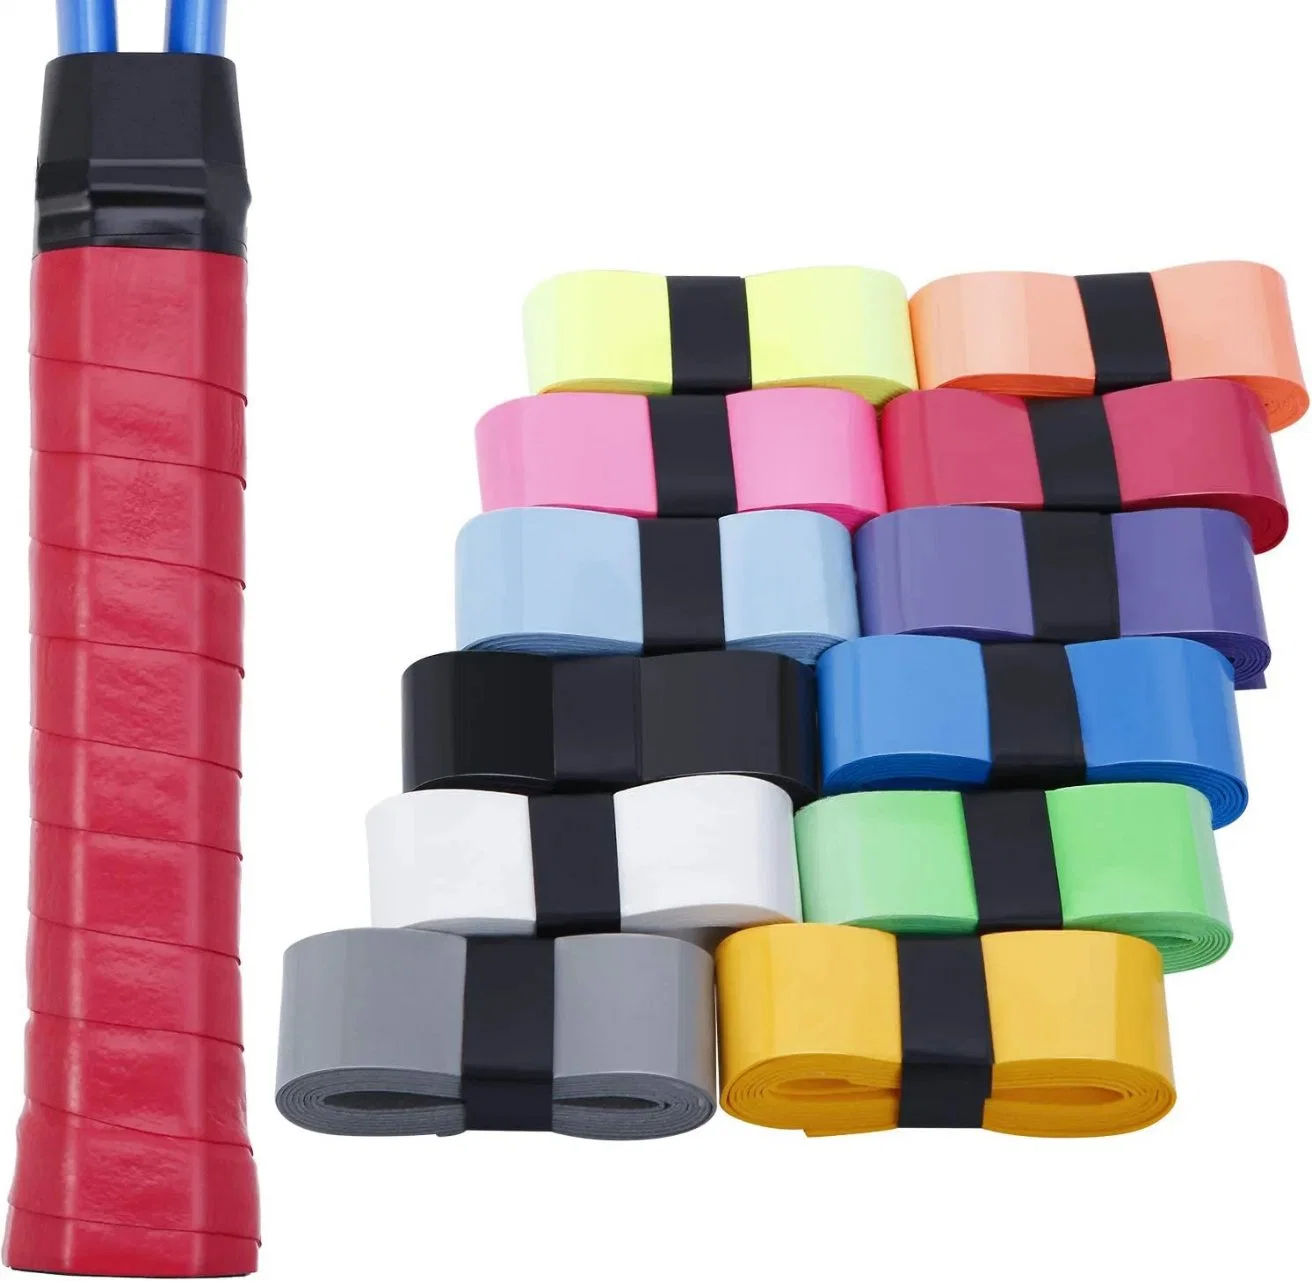 Factory Badminton Over Grip, Fishing Rod Grip for Badminton/Tennis Rackets/Fishing Handle Over Grips